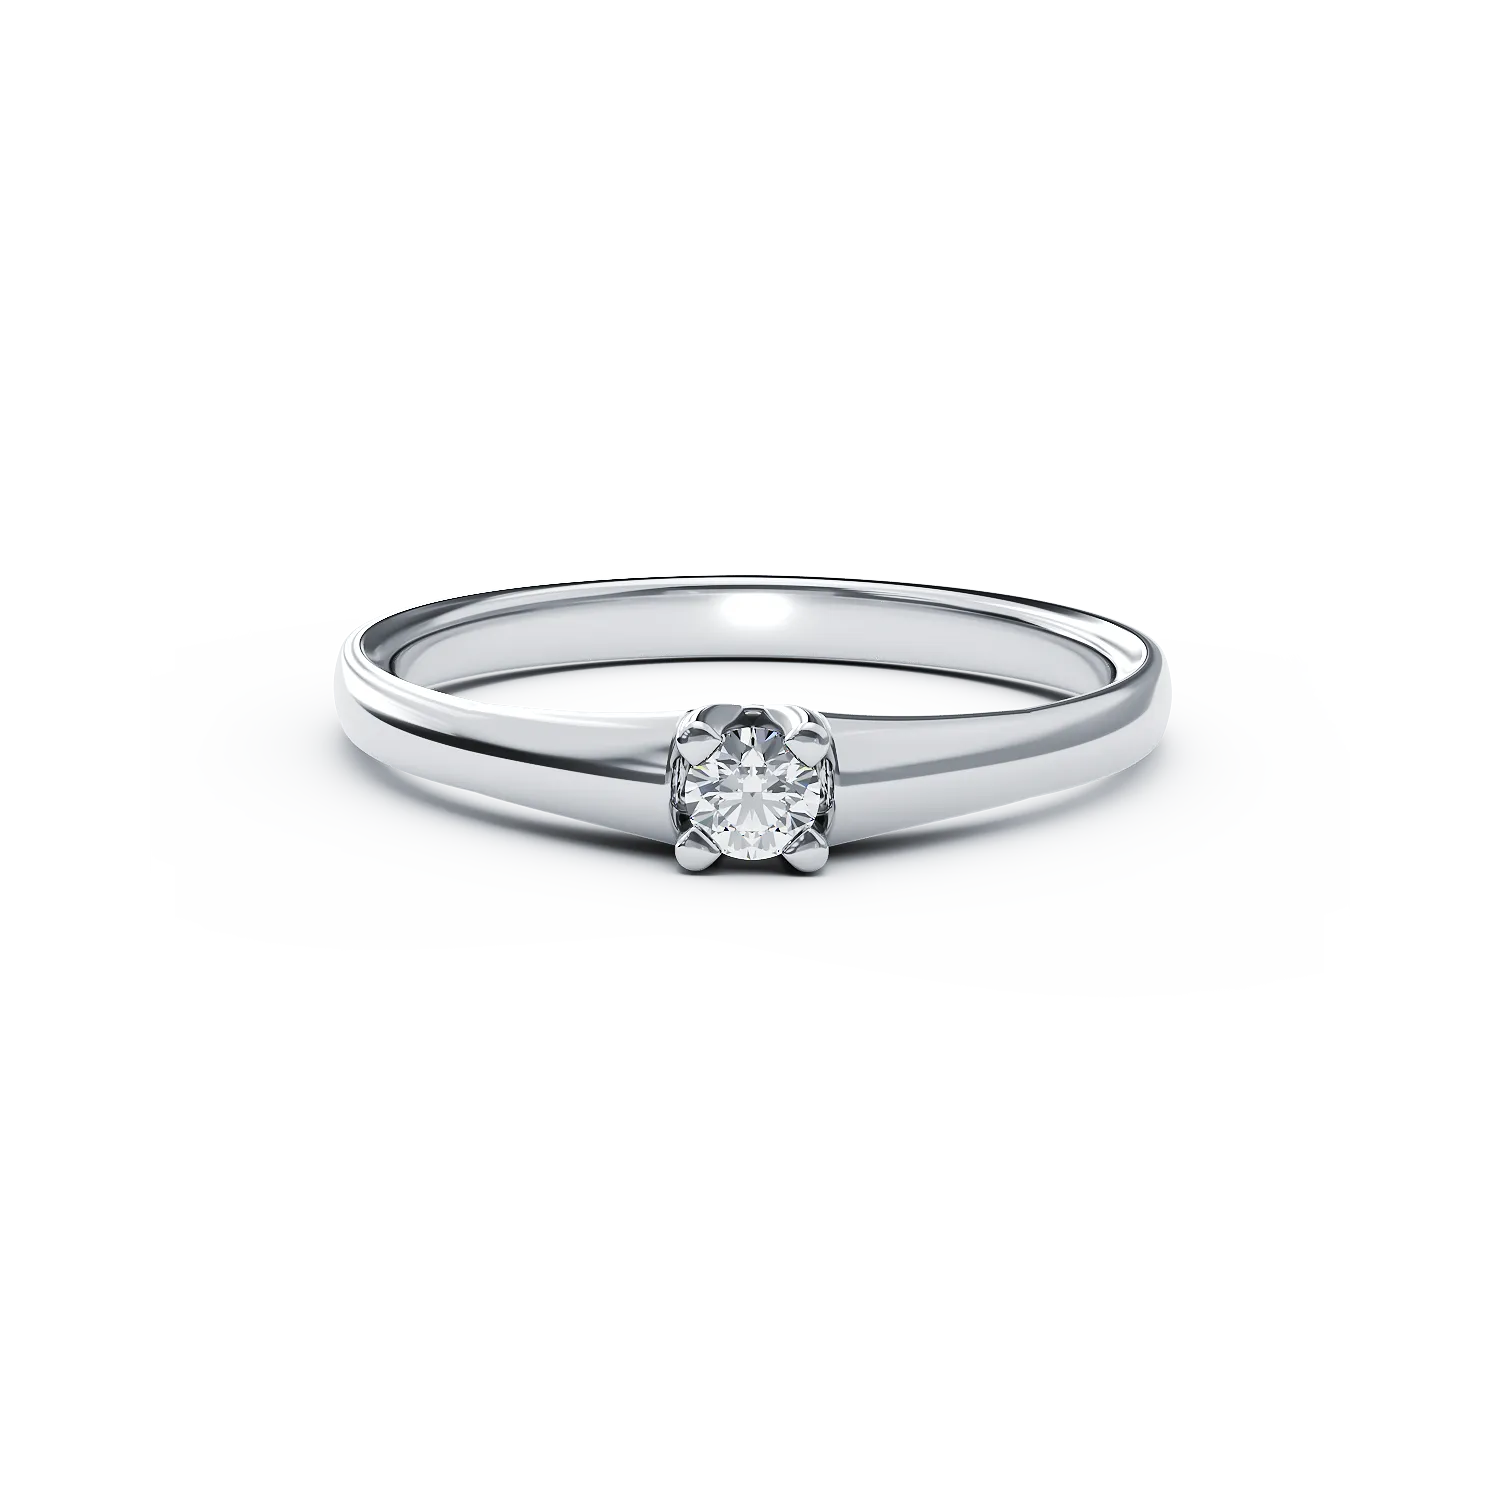 18K white gold engagement ring with a 0.09ct solitaire diamond